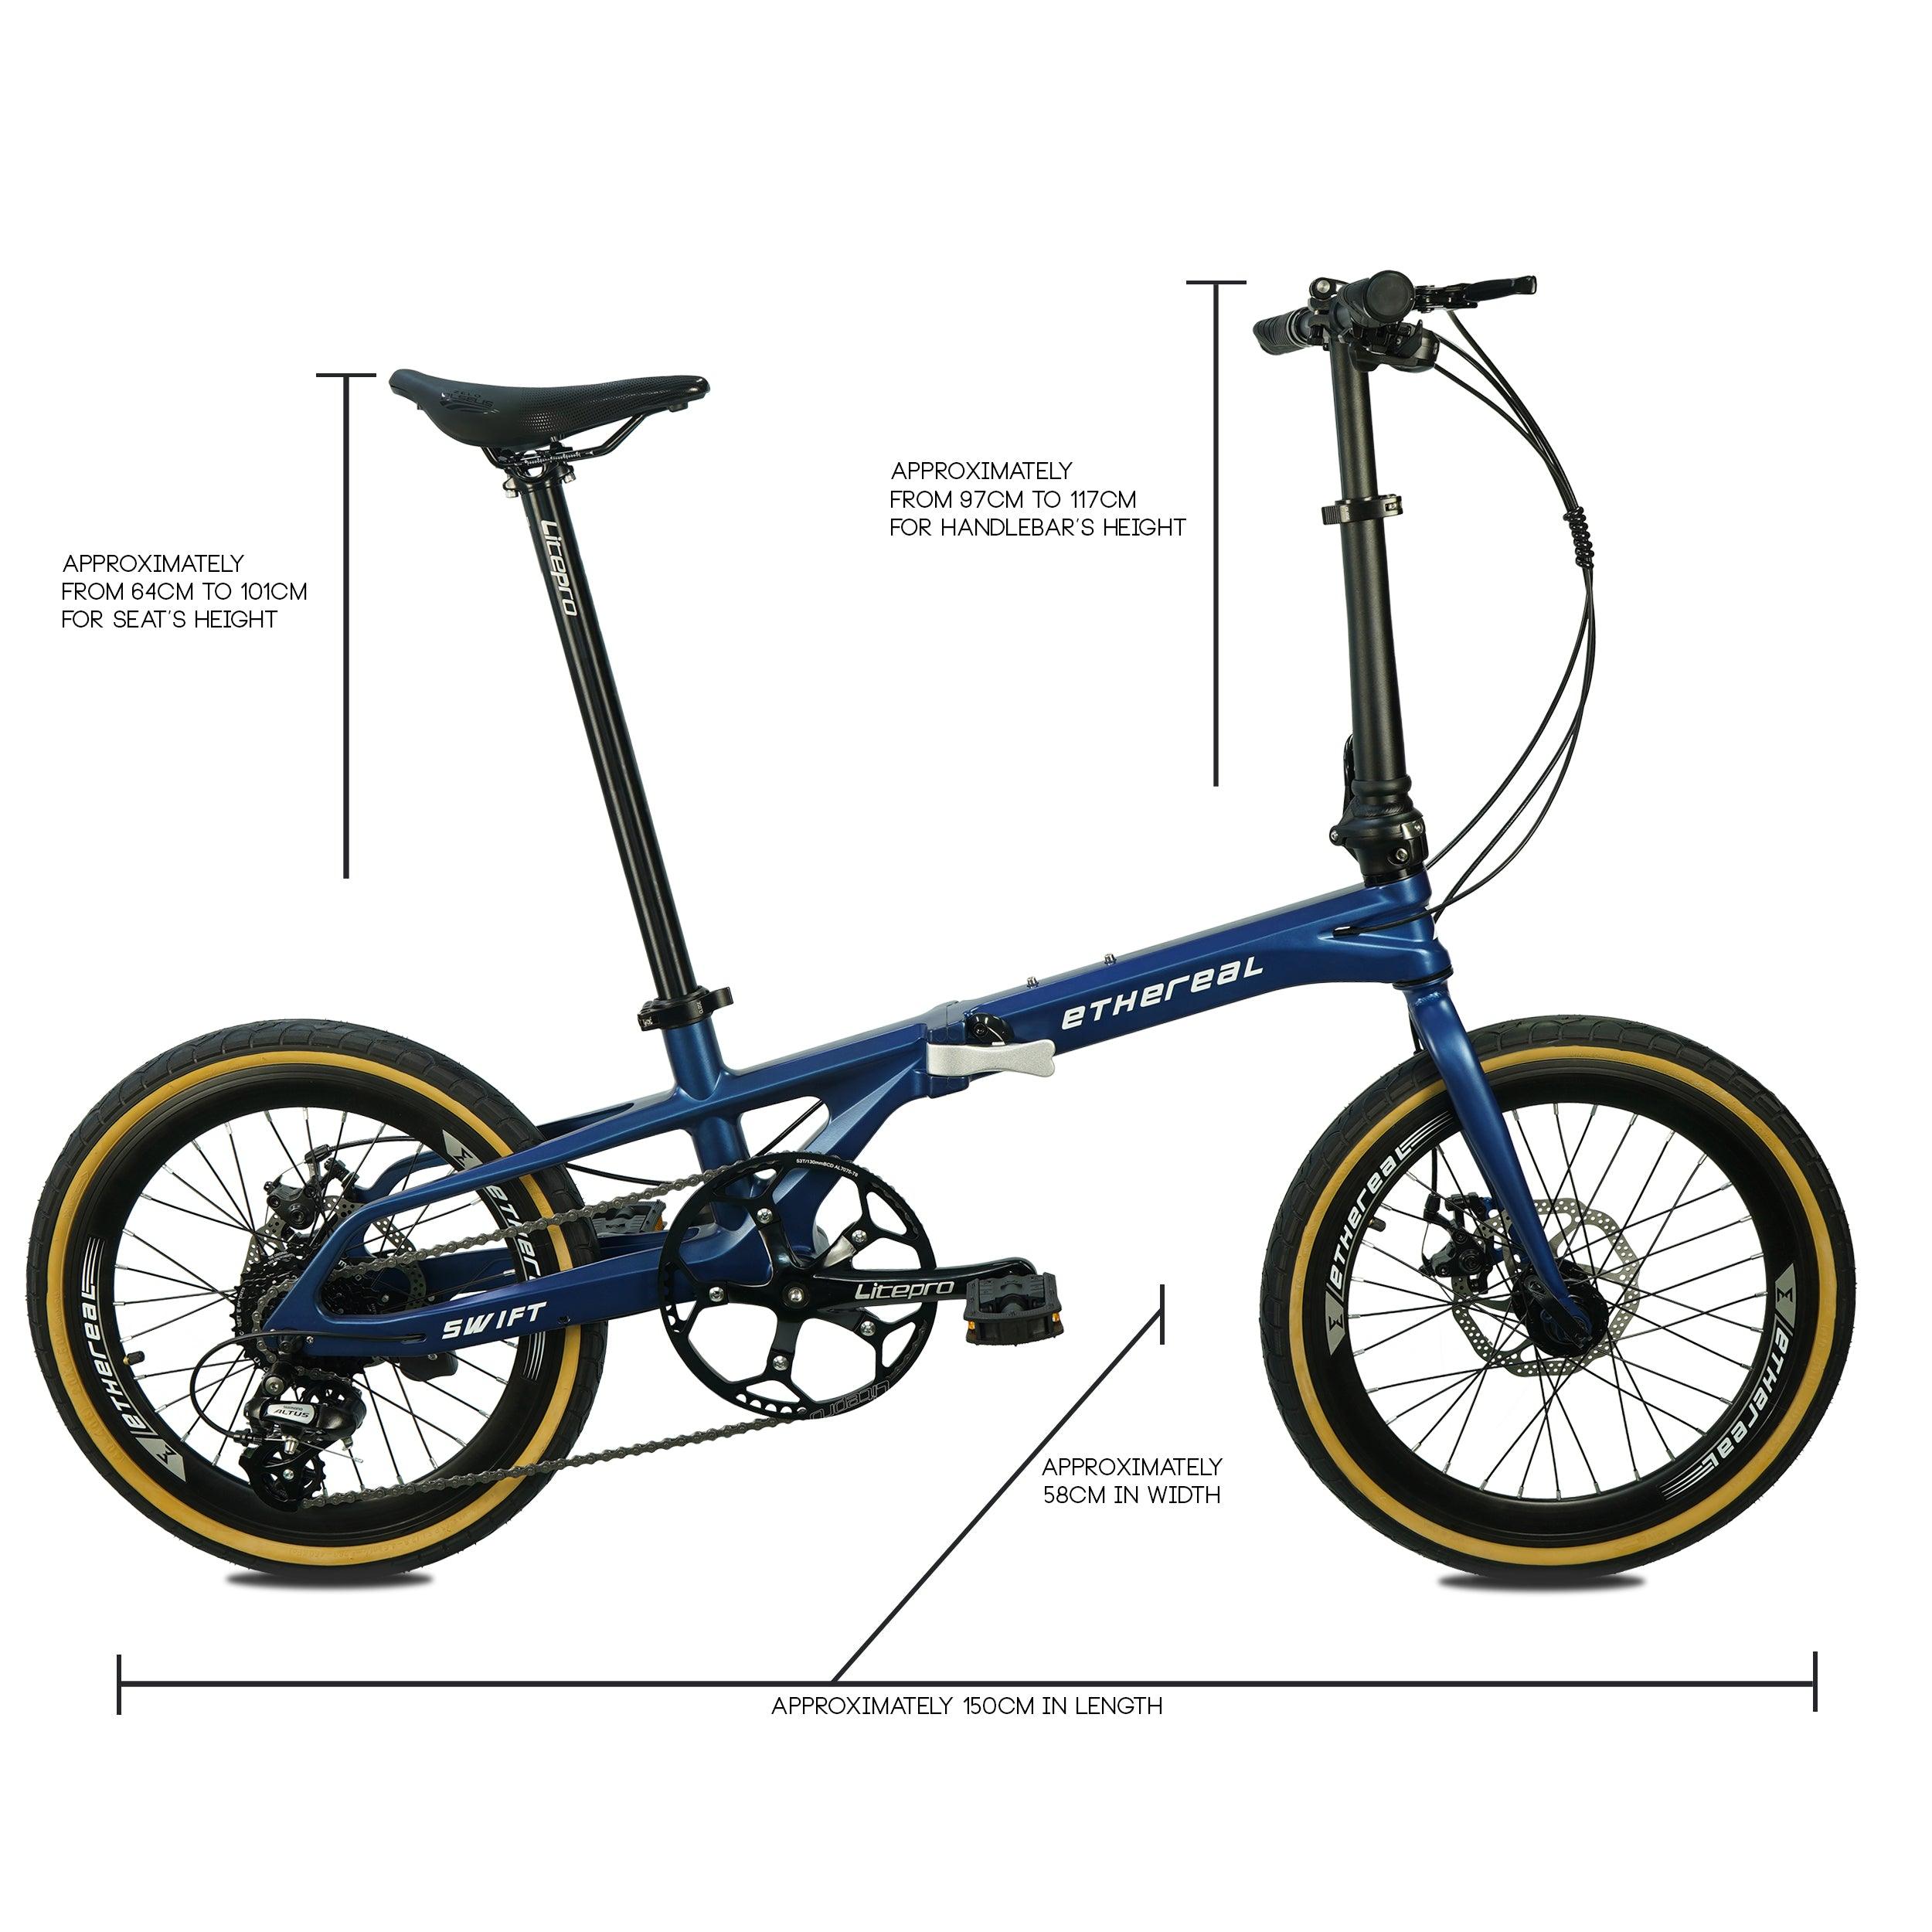 Ethereal Swift Gen 2 foldable bicycle with Shimano Altus 8-speed derailleur, Zoom mechanical disc brakes, Kenda tanwall pneumatic tires, and lightweight magnesium alloy frame - The Bike Atrium - Best Bicycle Shop in Singapore